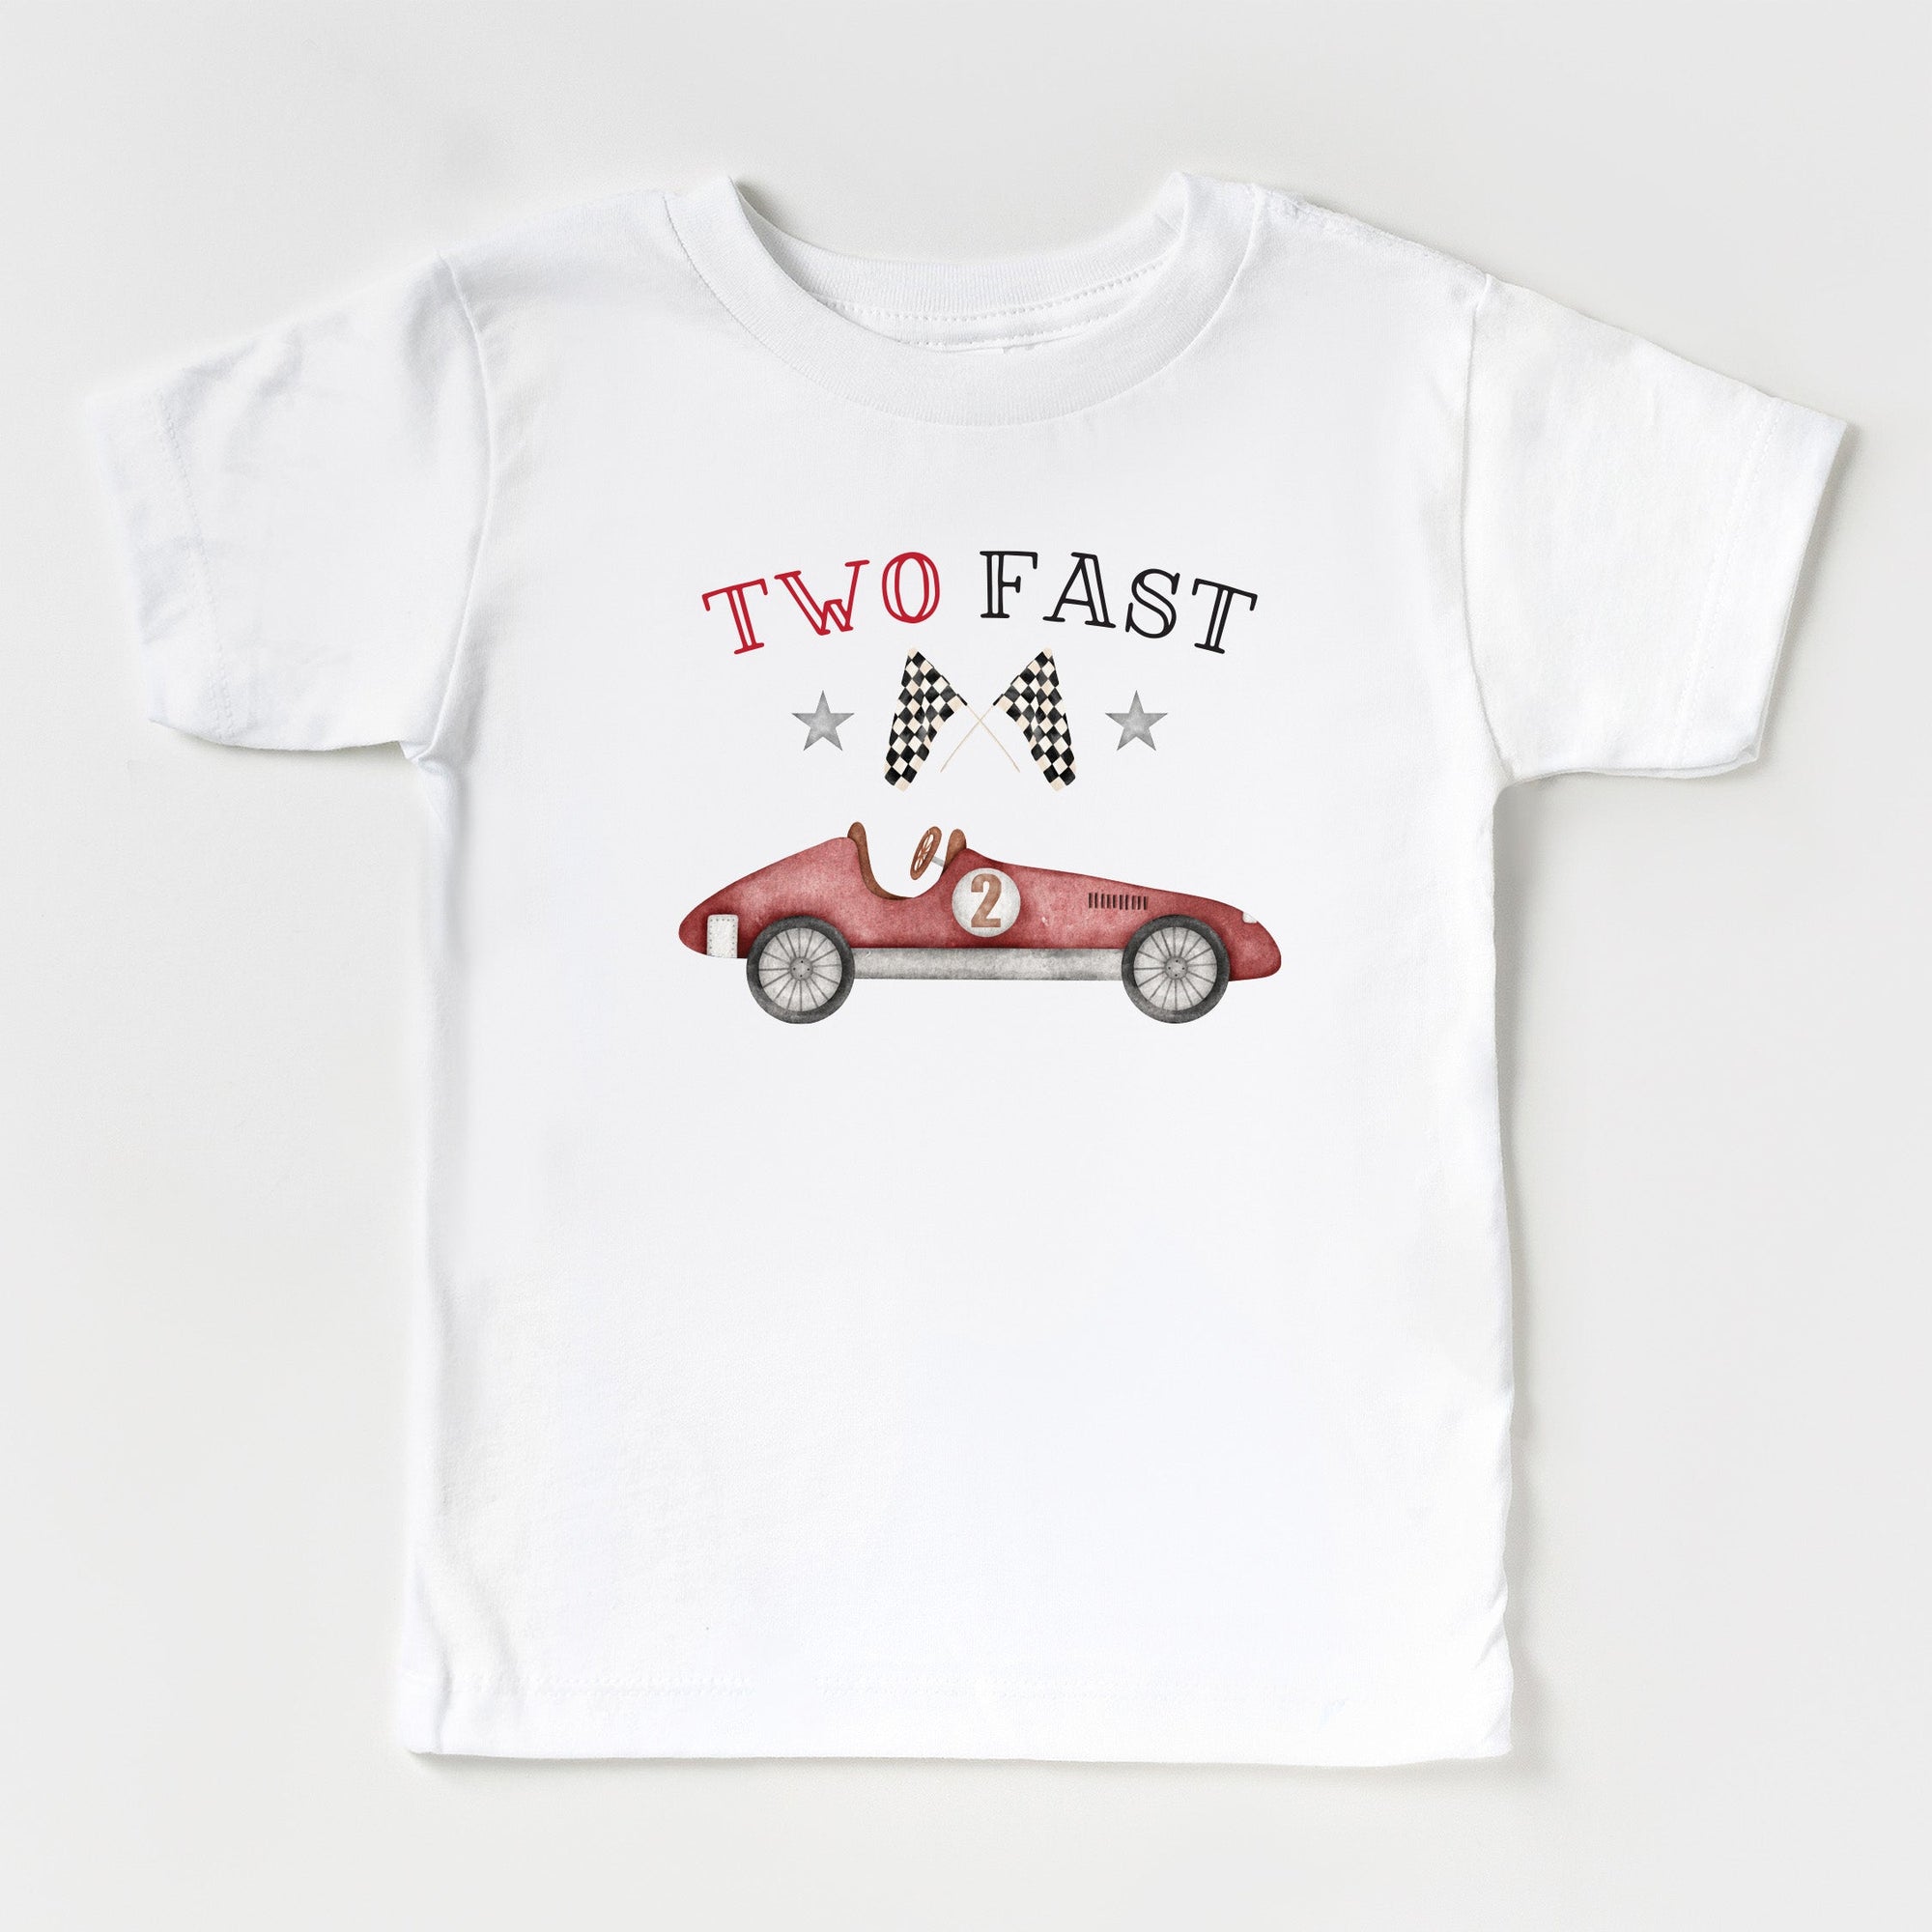 Cuddle Sleep Dream Baby & Toddler Tops Two Fast | RED Vintage Racecar 2nd Birthday Shirt